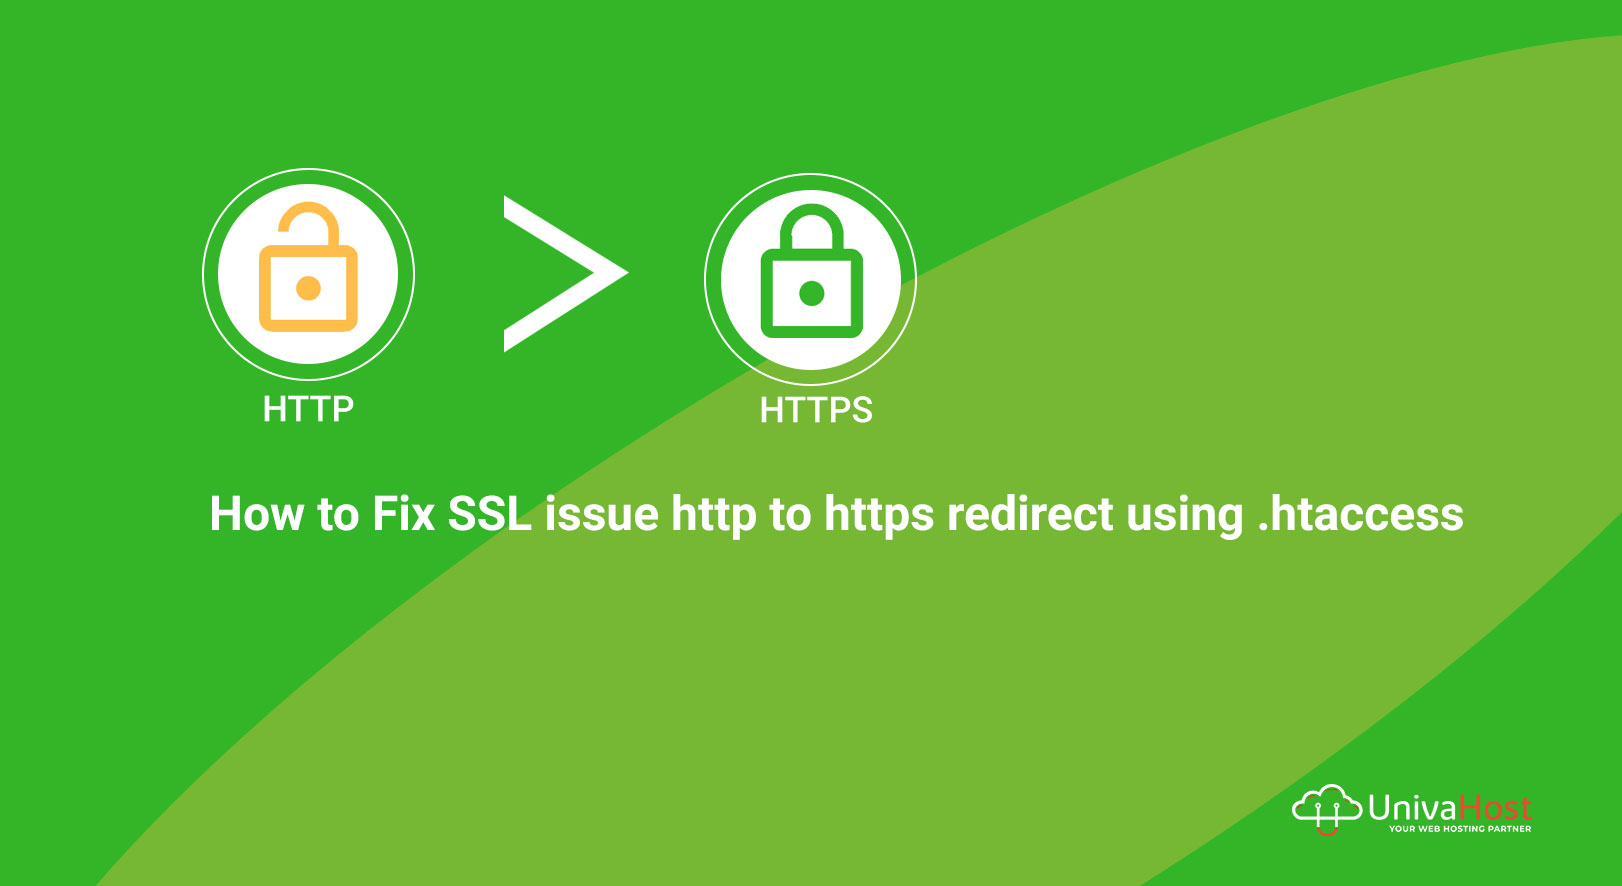 Ssl Issue Fix Http To Https